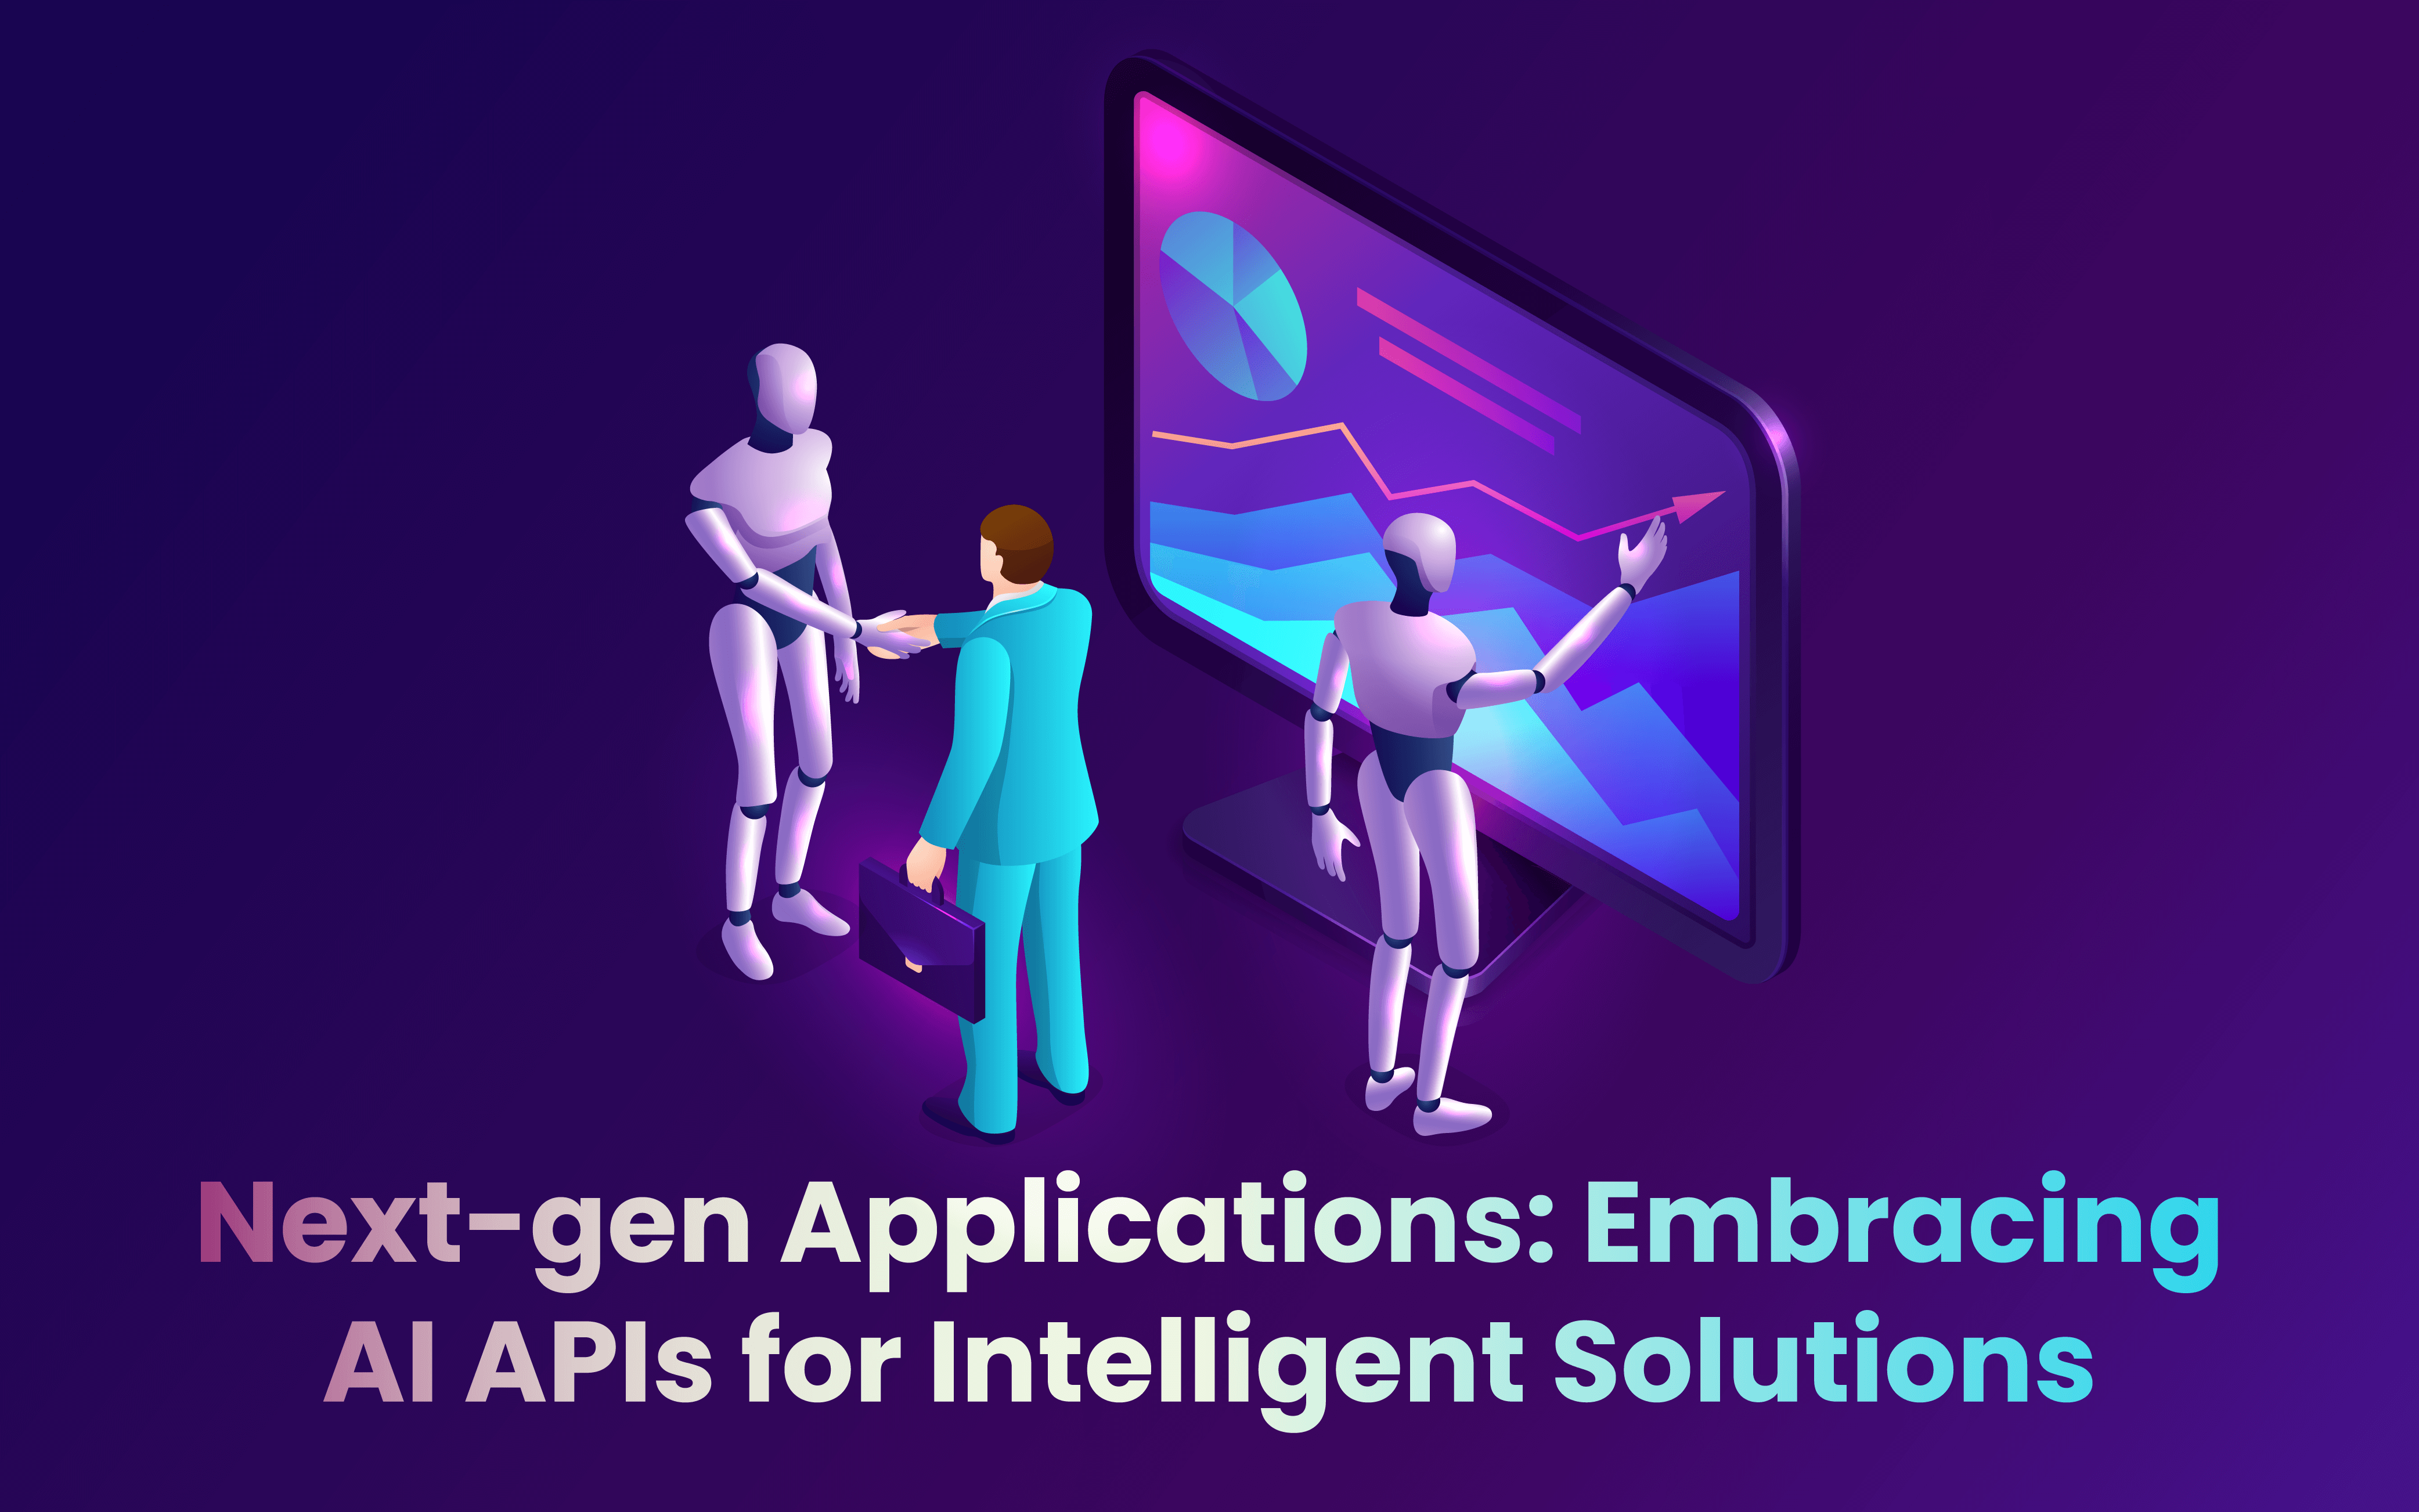 Next-gen Applications: Embracing AI APIs for Intelligent Solutions